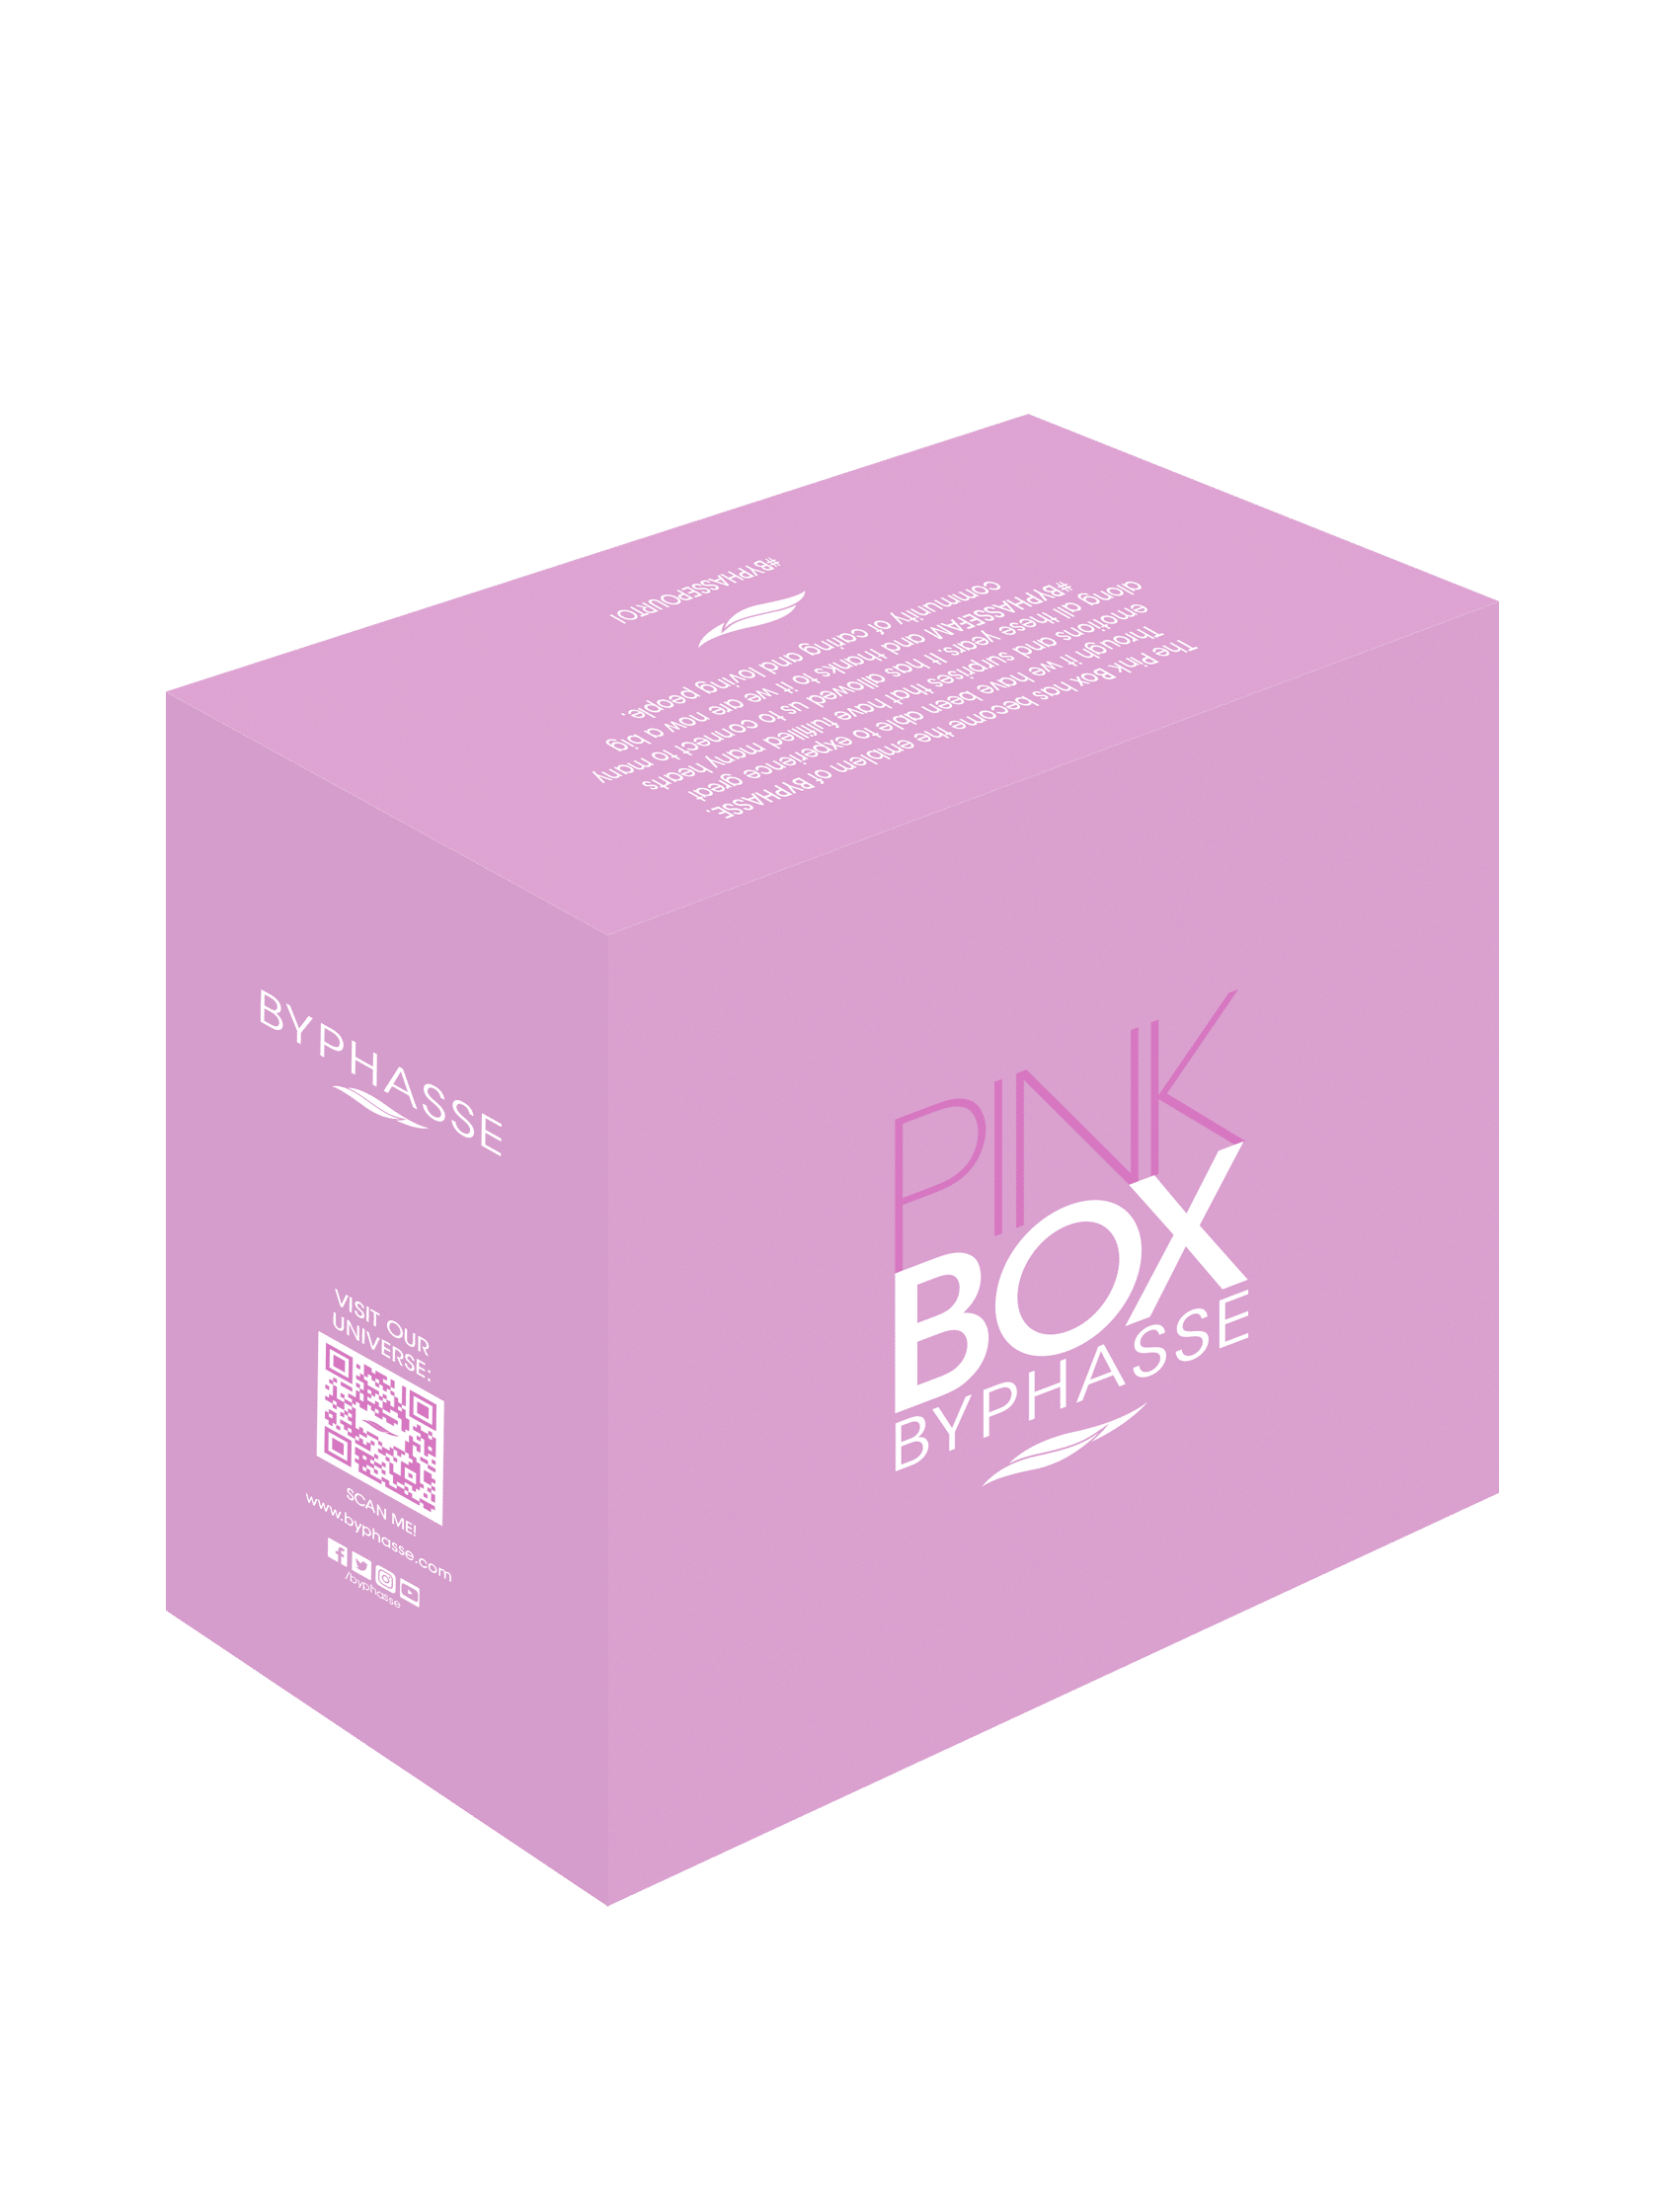  THE PINK BOX